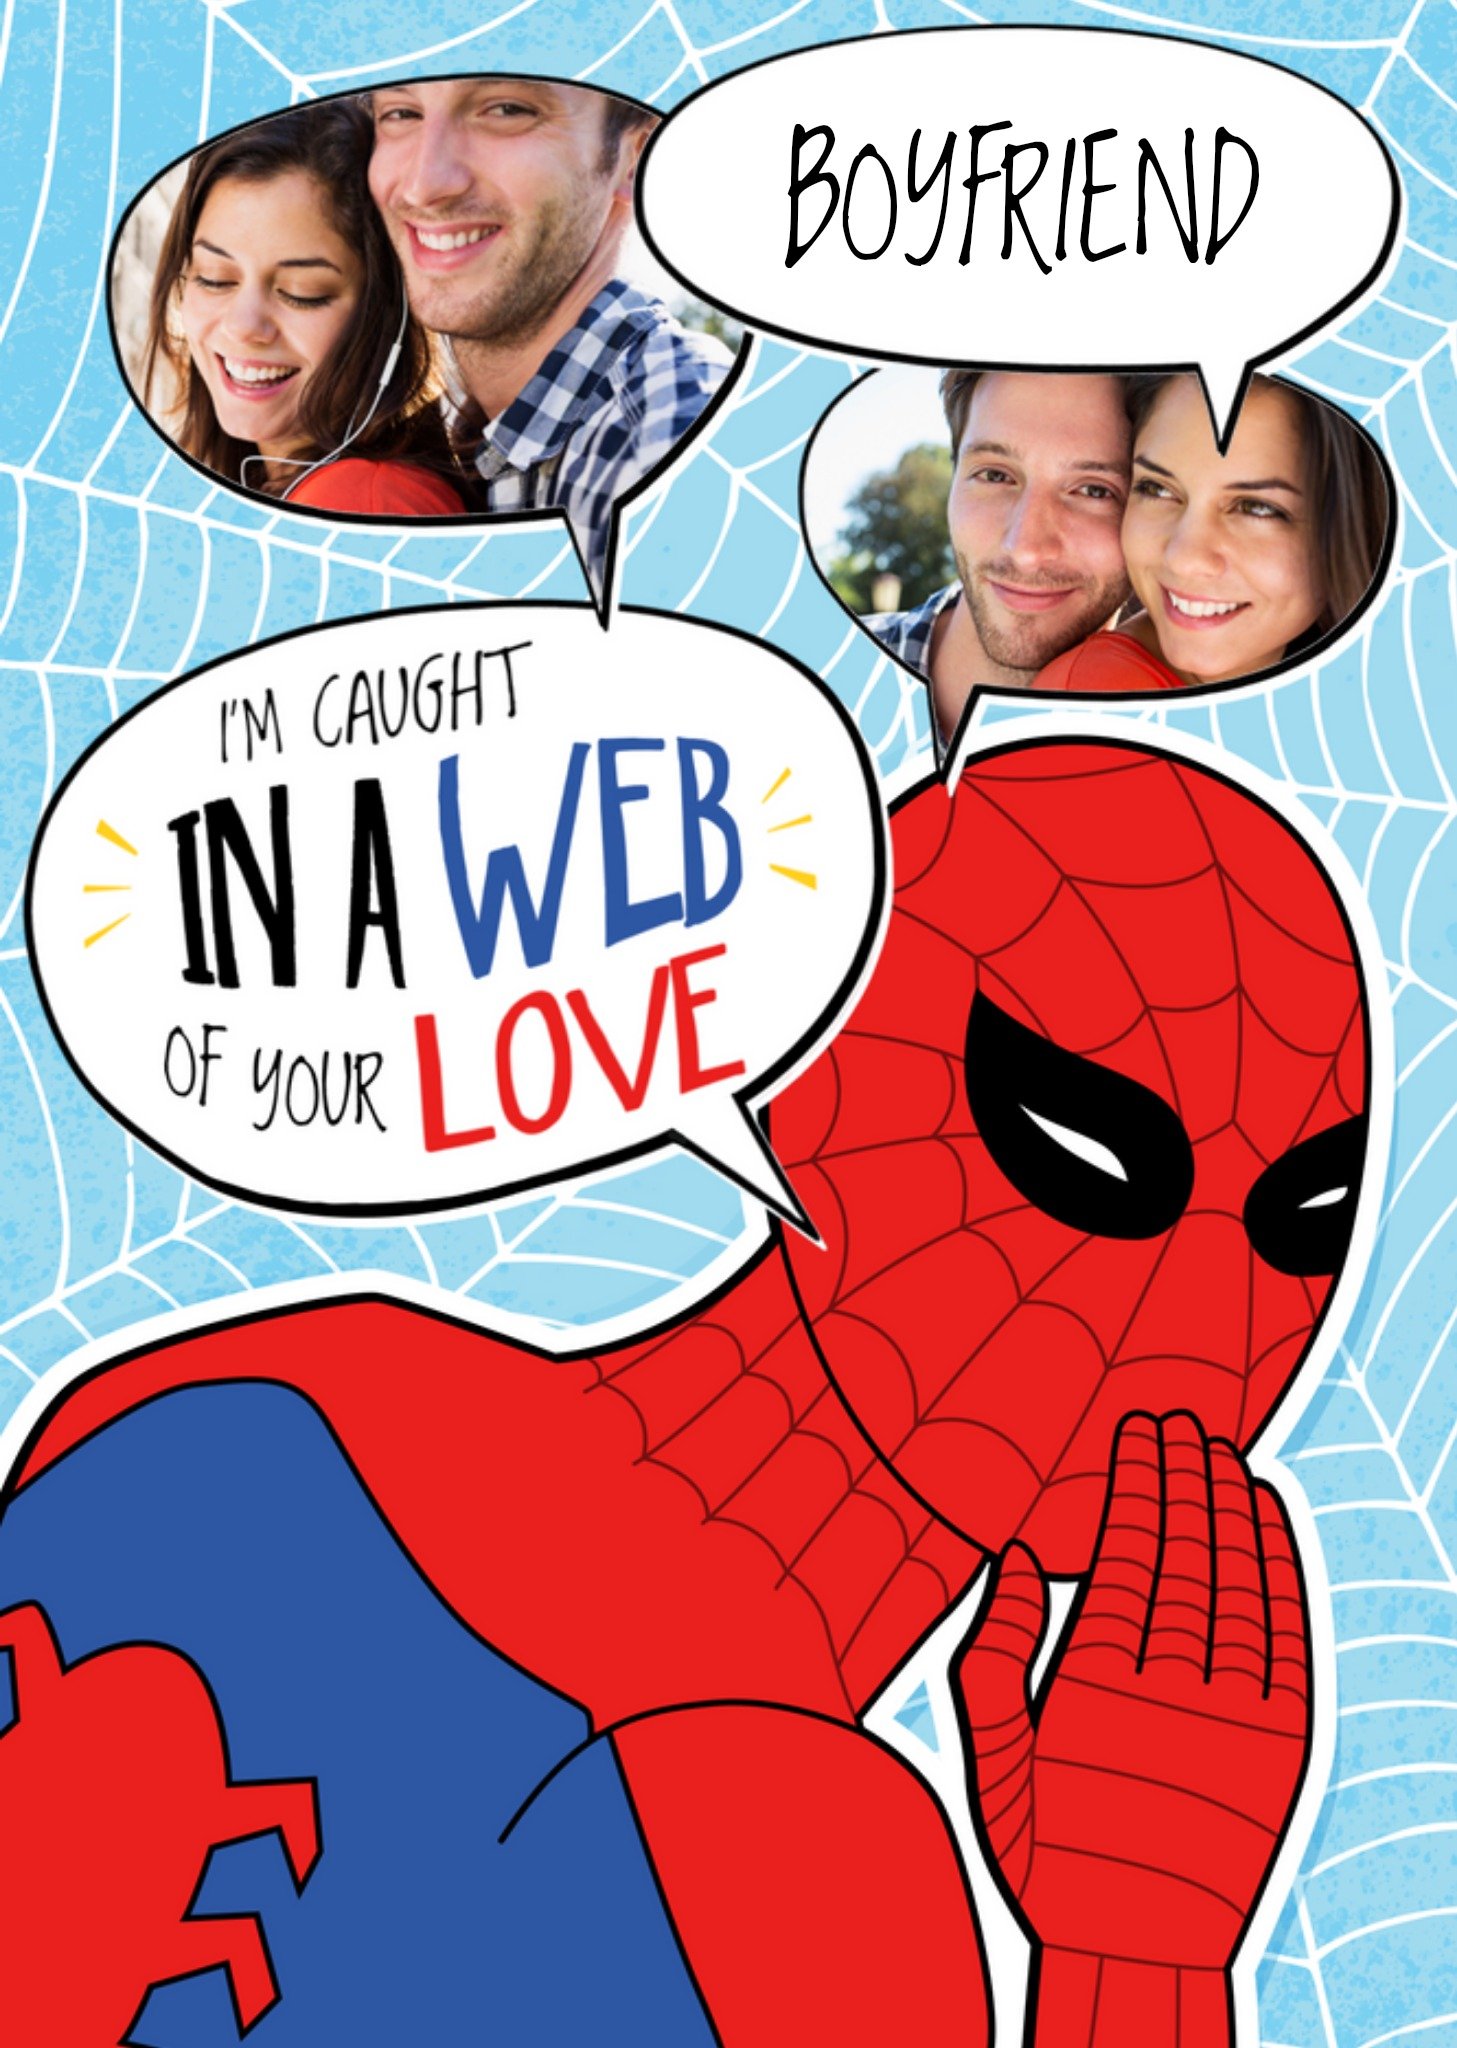 Marvel Caught In A Web Of Your Love Spiderman Photo Upload Valentine's Day Card, Large